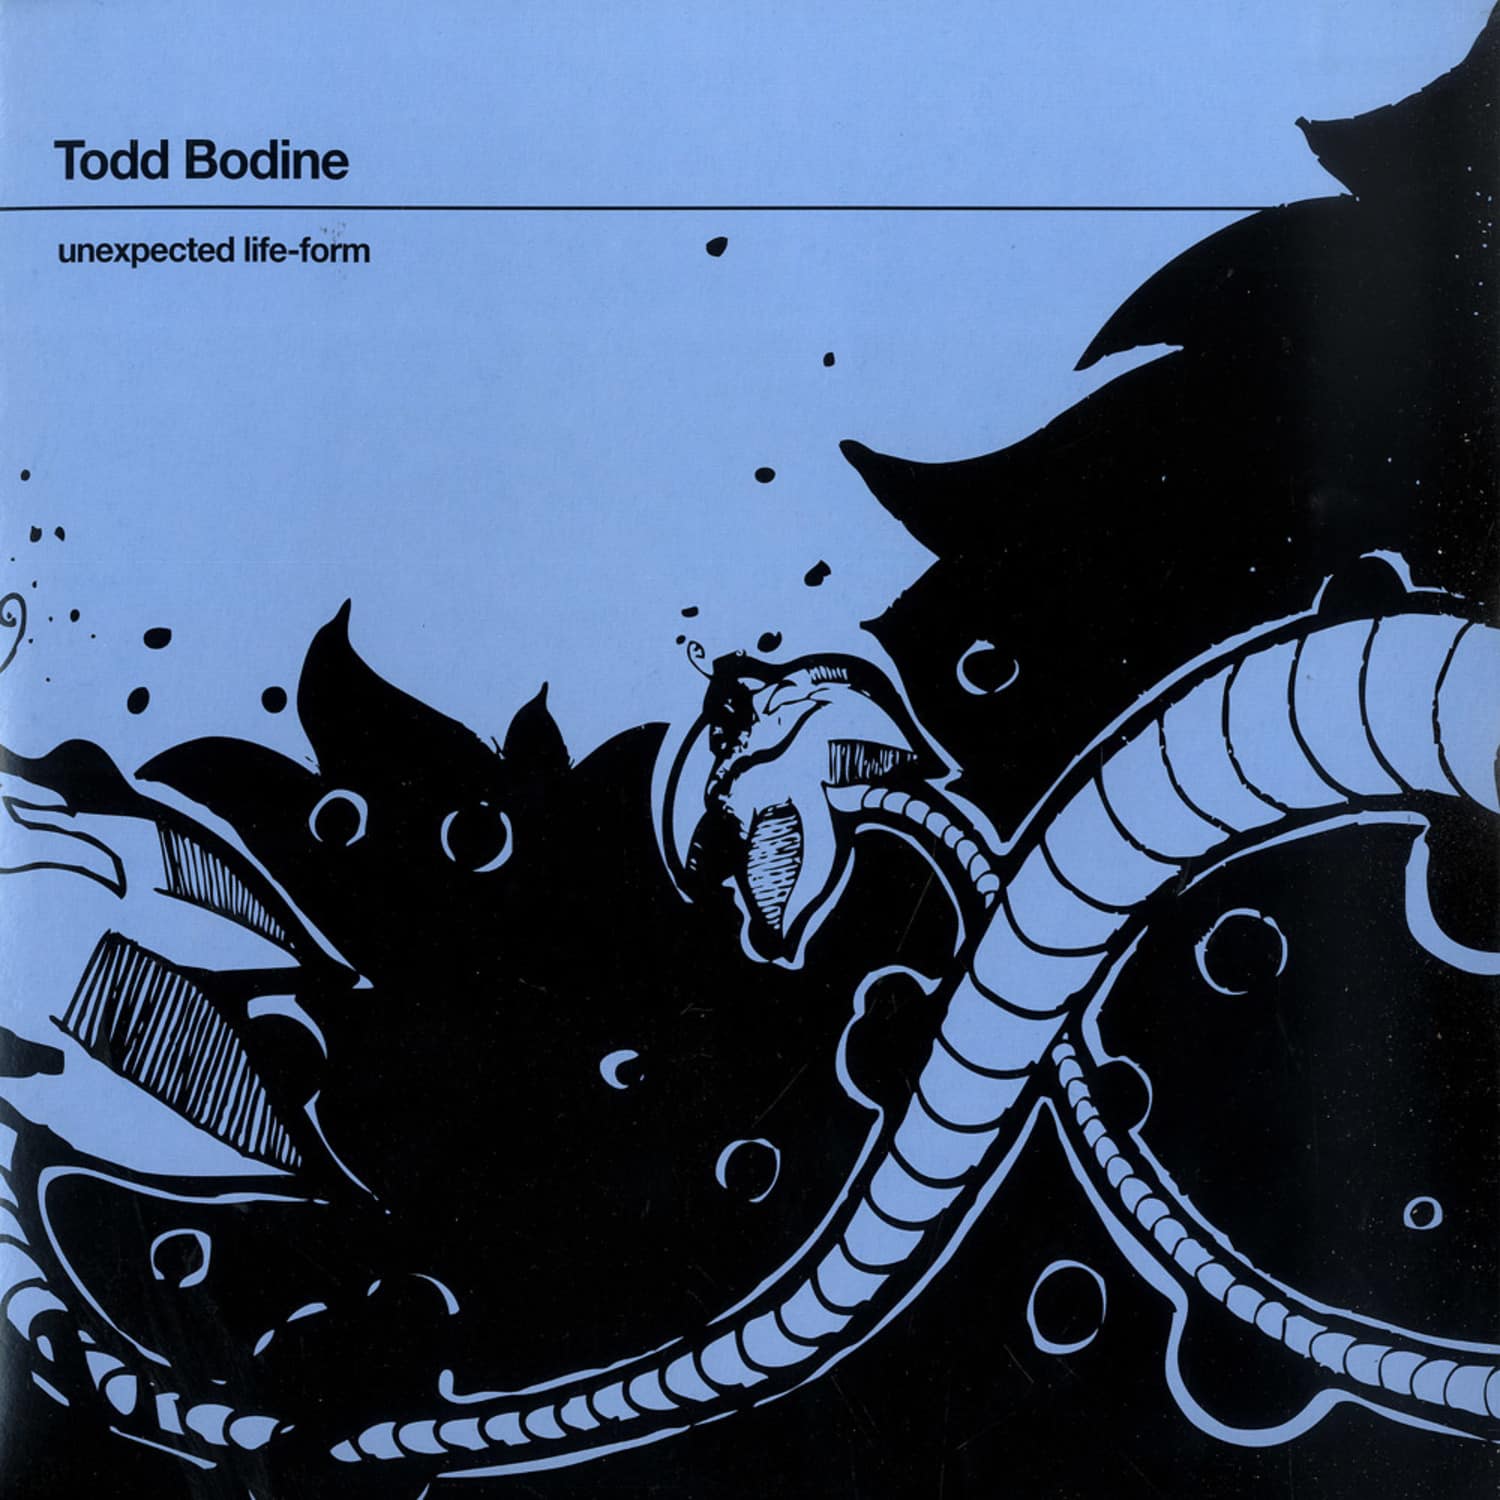 Todd Bodine - UNEXPECTED LIFE-FORM